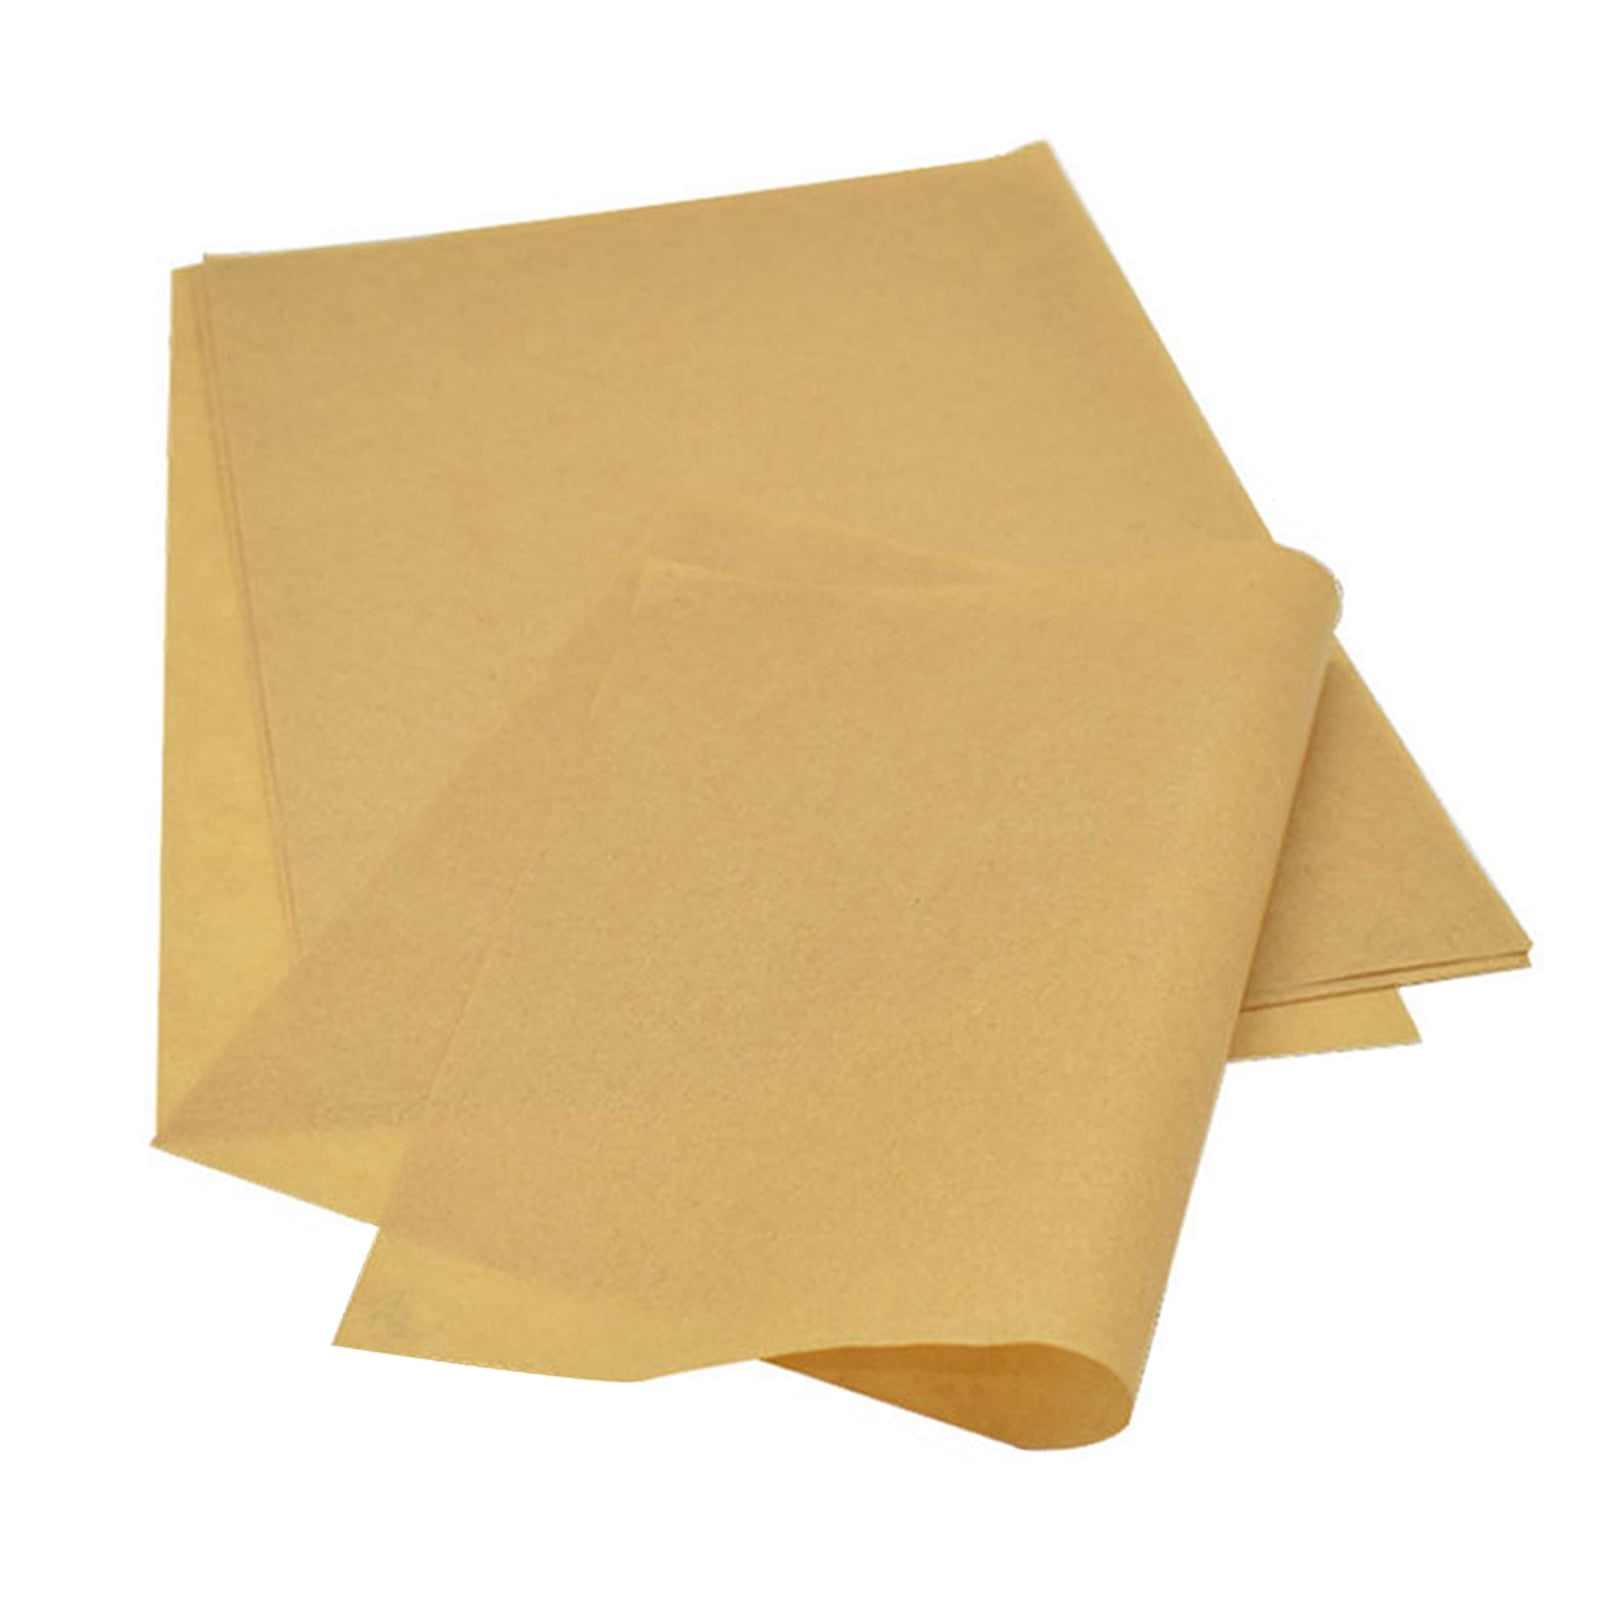 Unbleached Parchment Paper 12 x 16 Inches Set of 100 Transser Parchment Baking Paper Greaseproof Paper Sheets Non Stick Baking